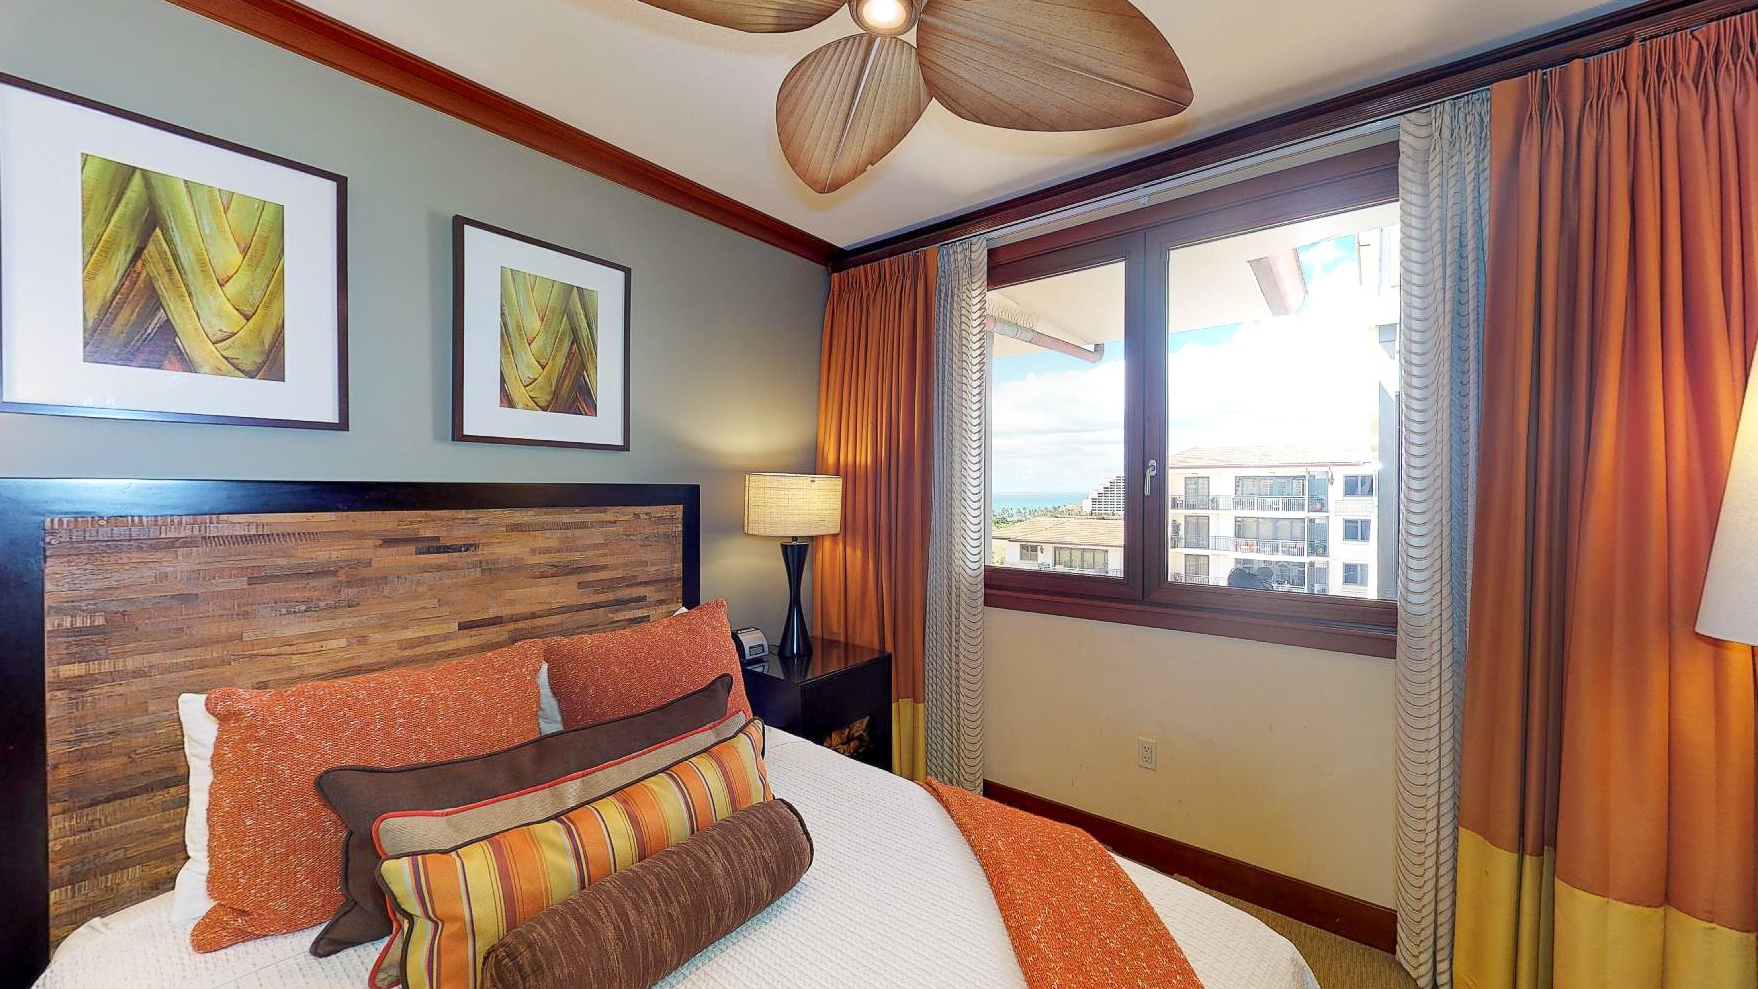 Kapolei Vacation Rentals, Ko Olina Beach Villas O1121 - The second guest bedroom with a queen bed and a view.